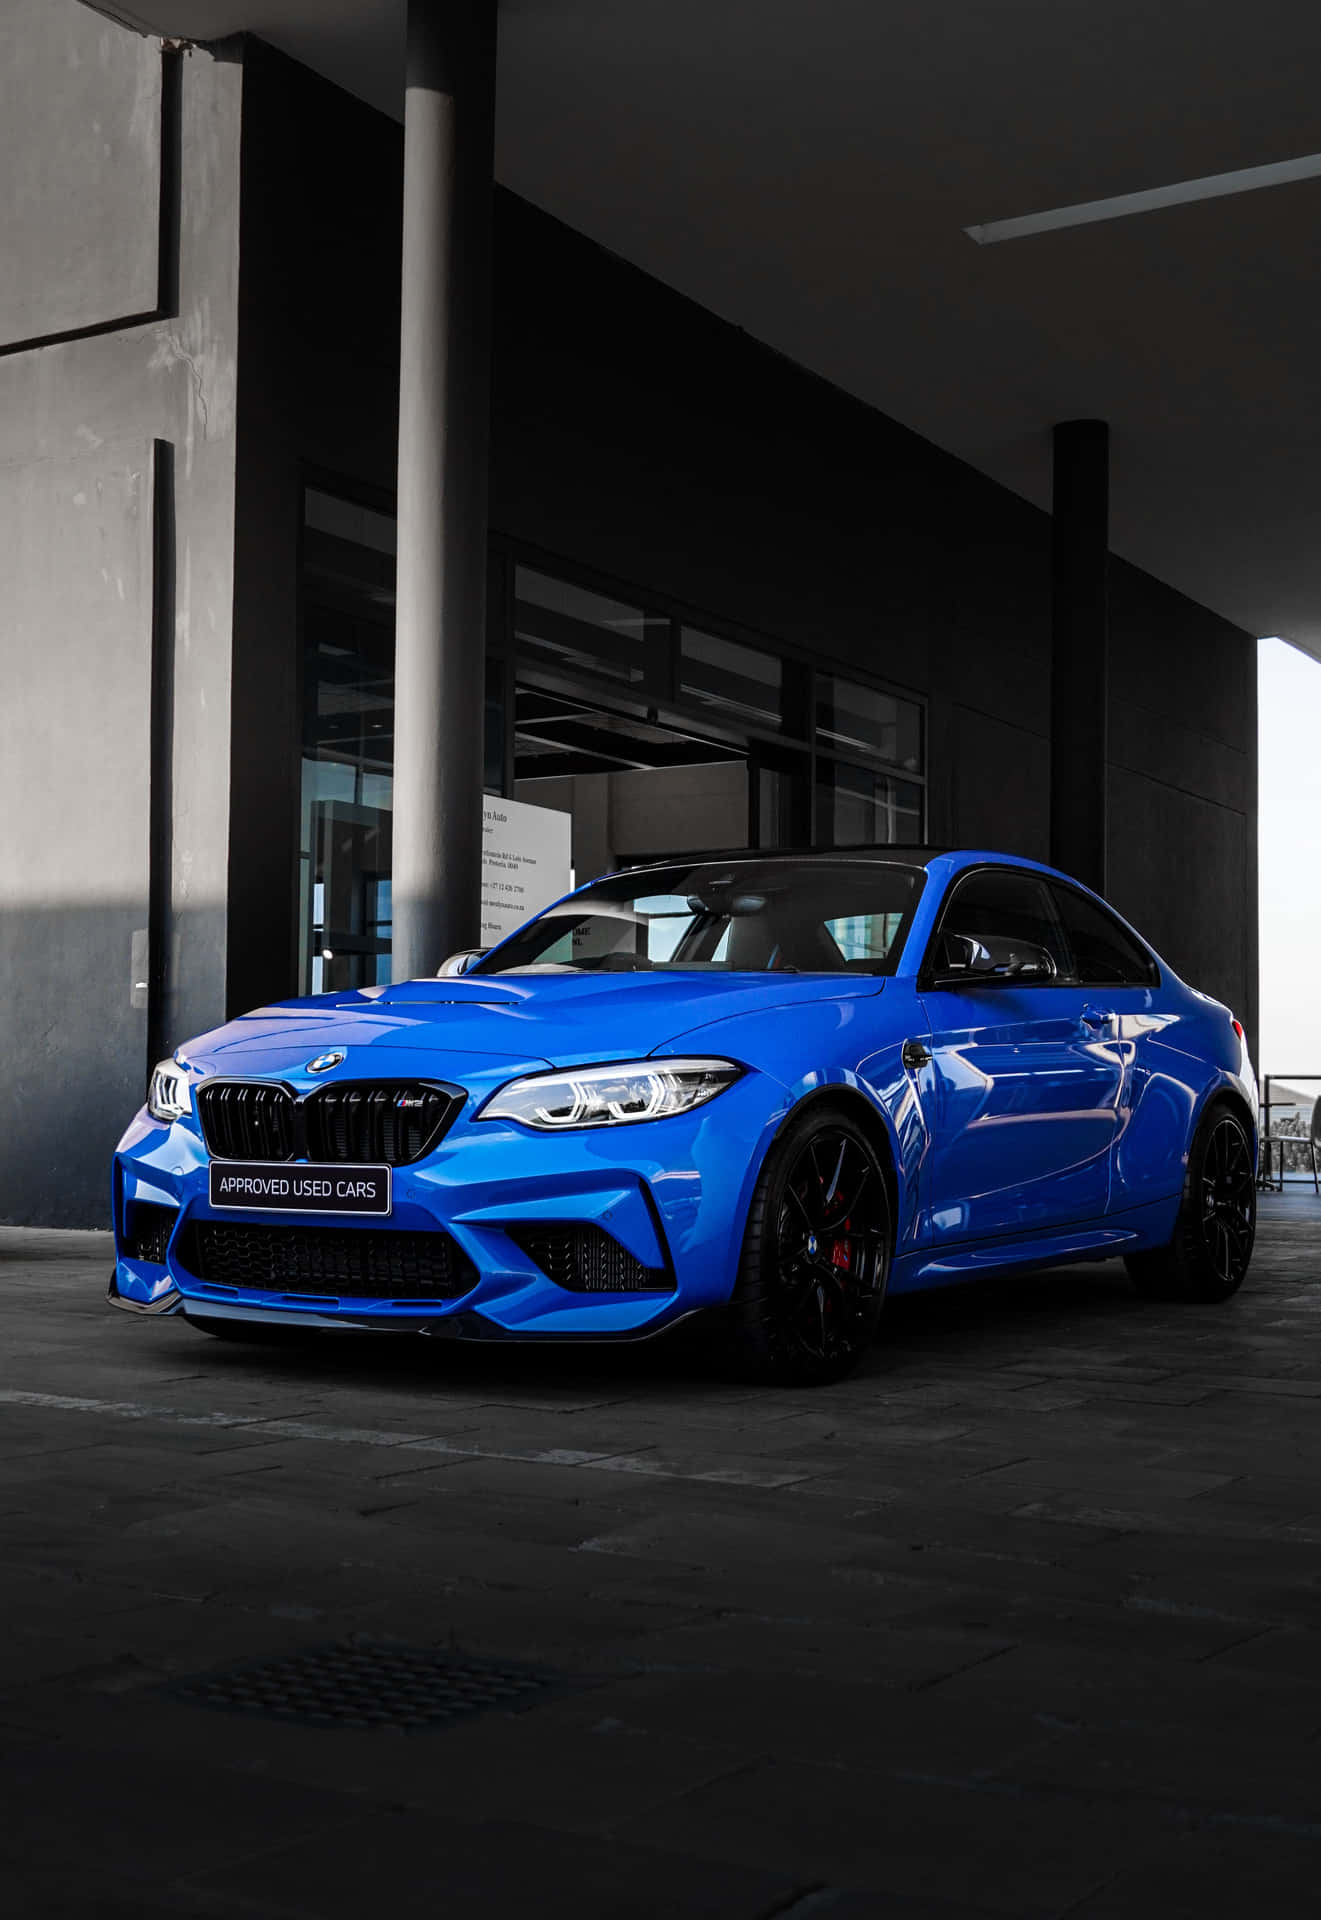 Bmw M4 M4 M4 M4 M4 M4 M4 M4 M4 M4. (this Sentence Doesn't Have Meaning In Swedish. Could You Provide Another Sentence For Me To Translate?)